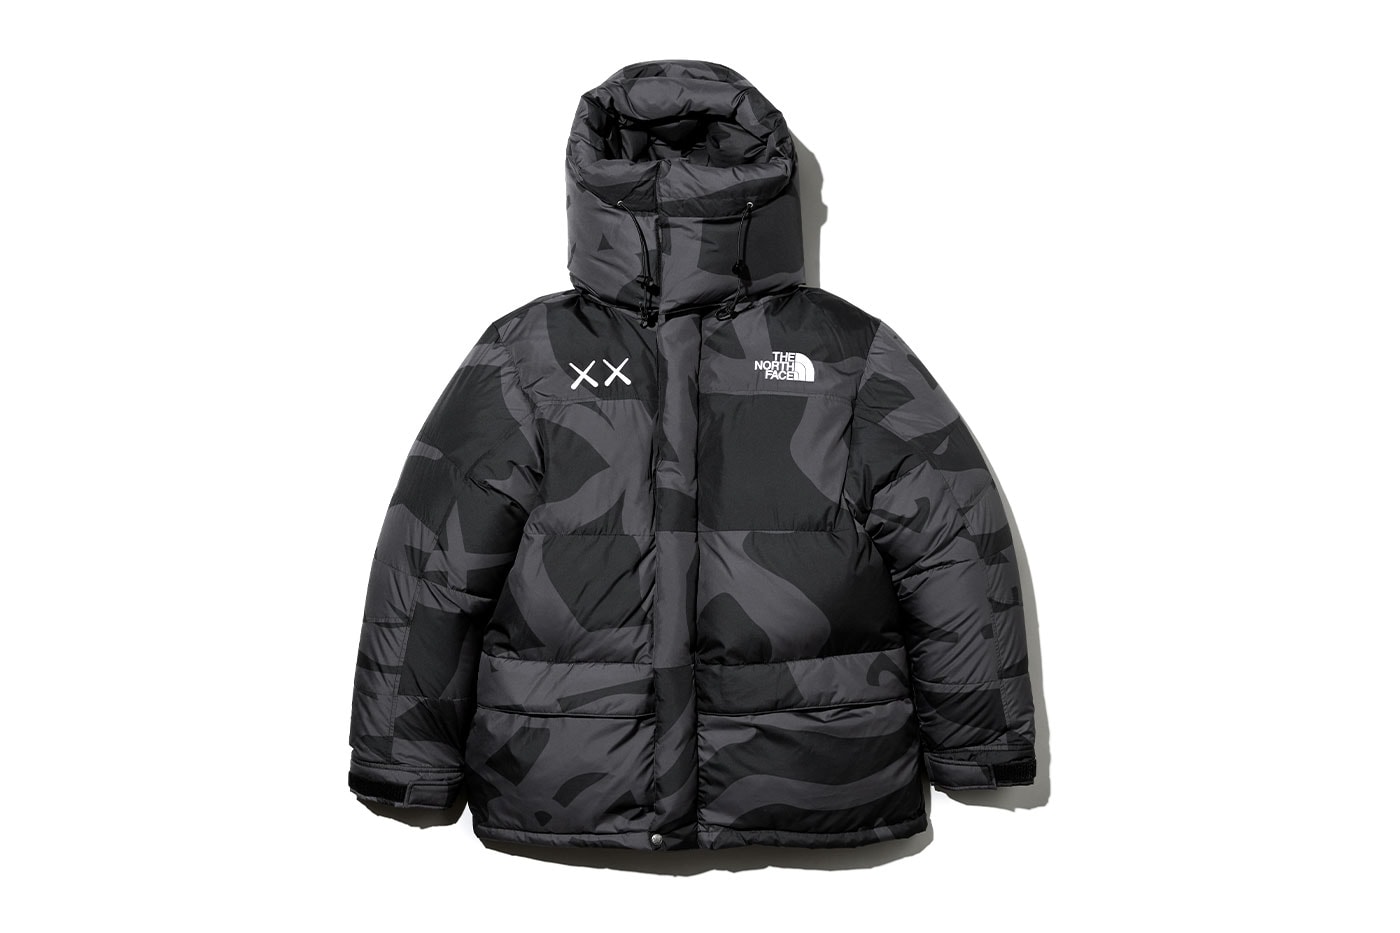 TNF The North Face x KAWS Hoodie tee mitts jacket parka product images pant mule release info date price